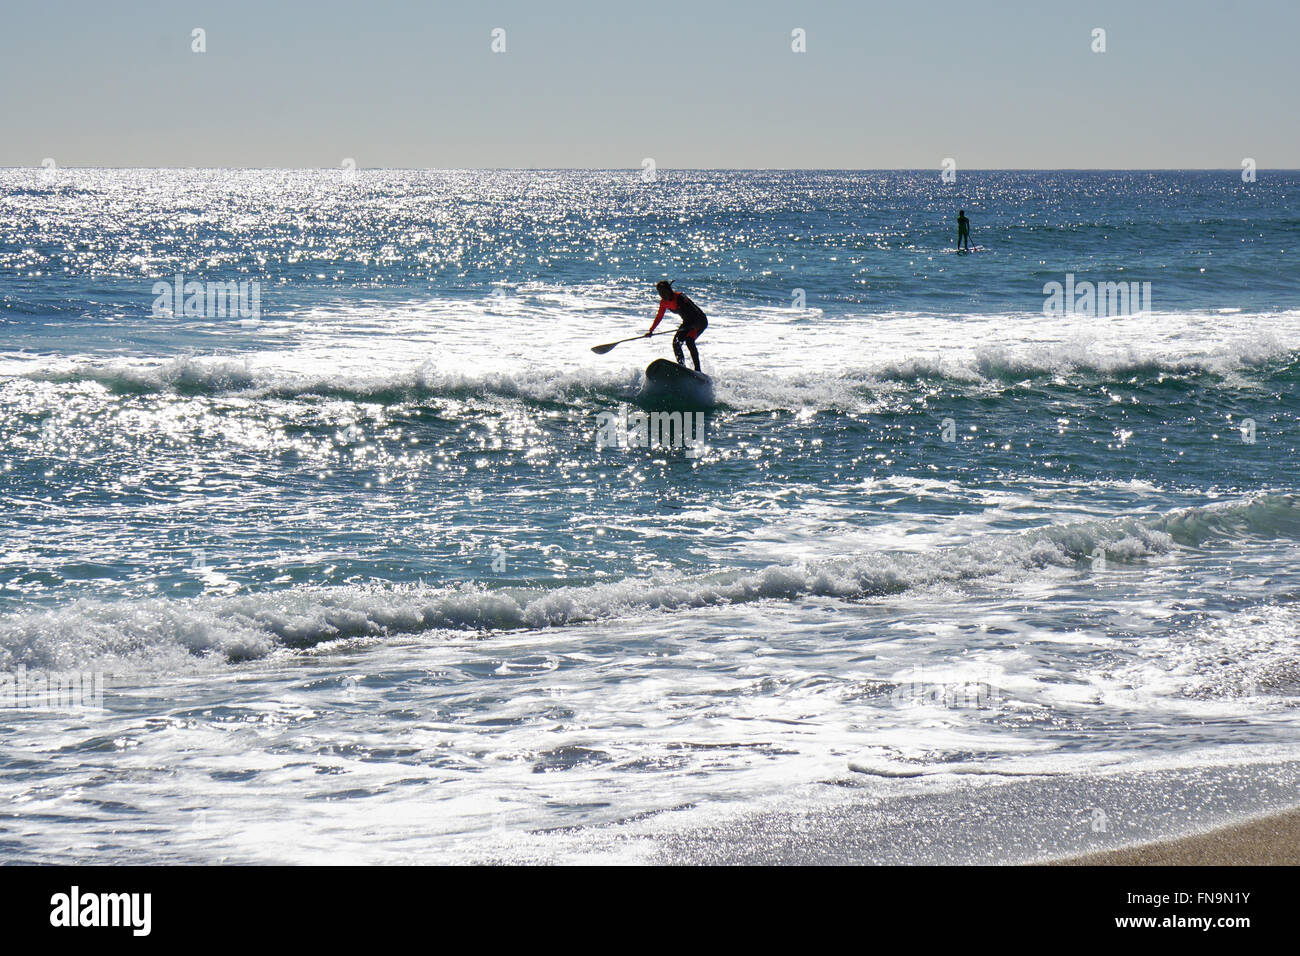 Stand up paddle surfing or standup paddleboarding Stock Photo